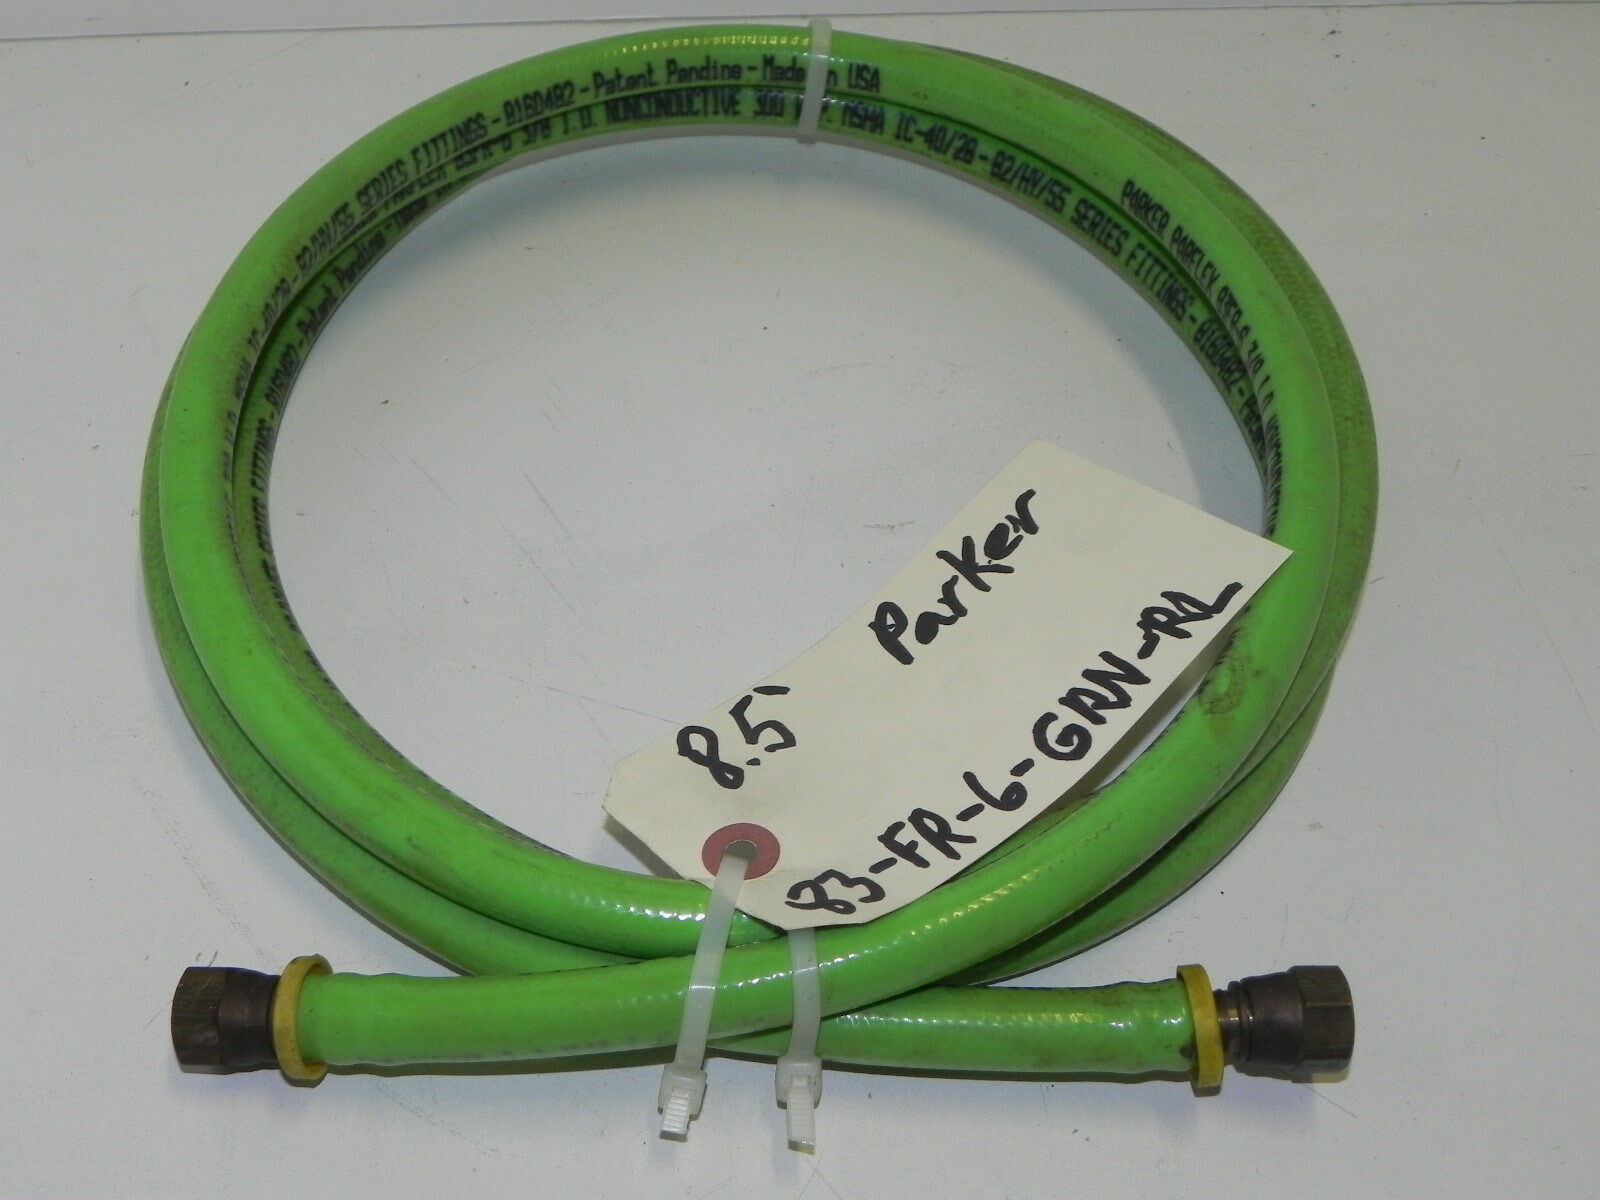 Primary image for PARKER PARFLEX HYDRAULIC HOSE 83-FR-6-GRN-RL 3/8" ID L: 8.5' FT W/FITTINGS